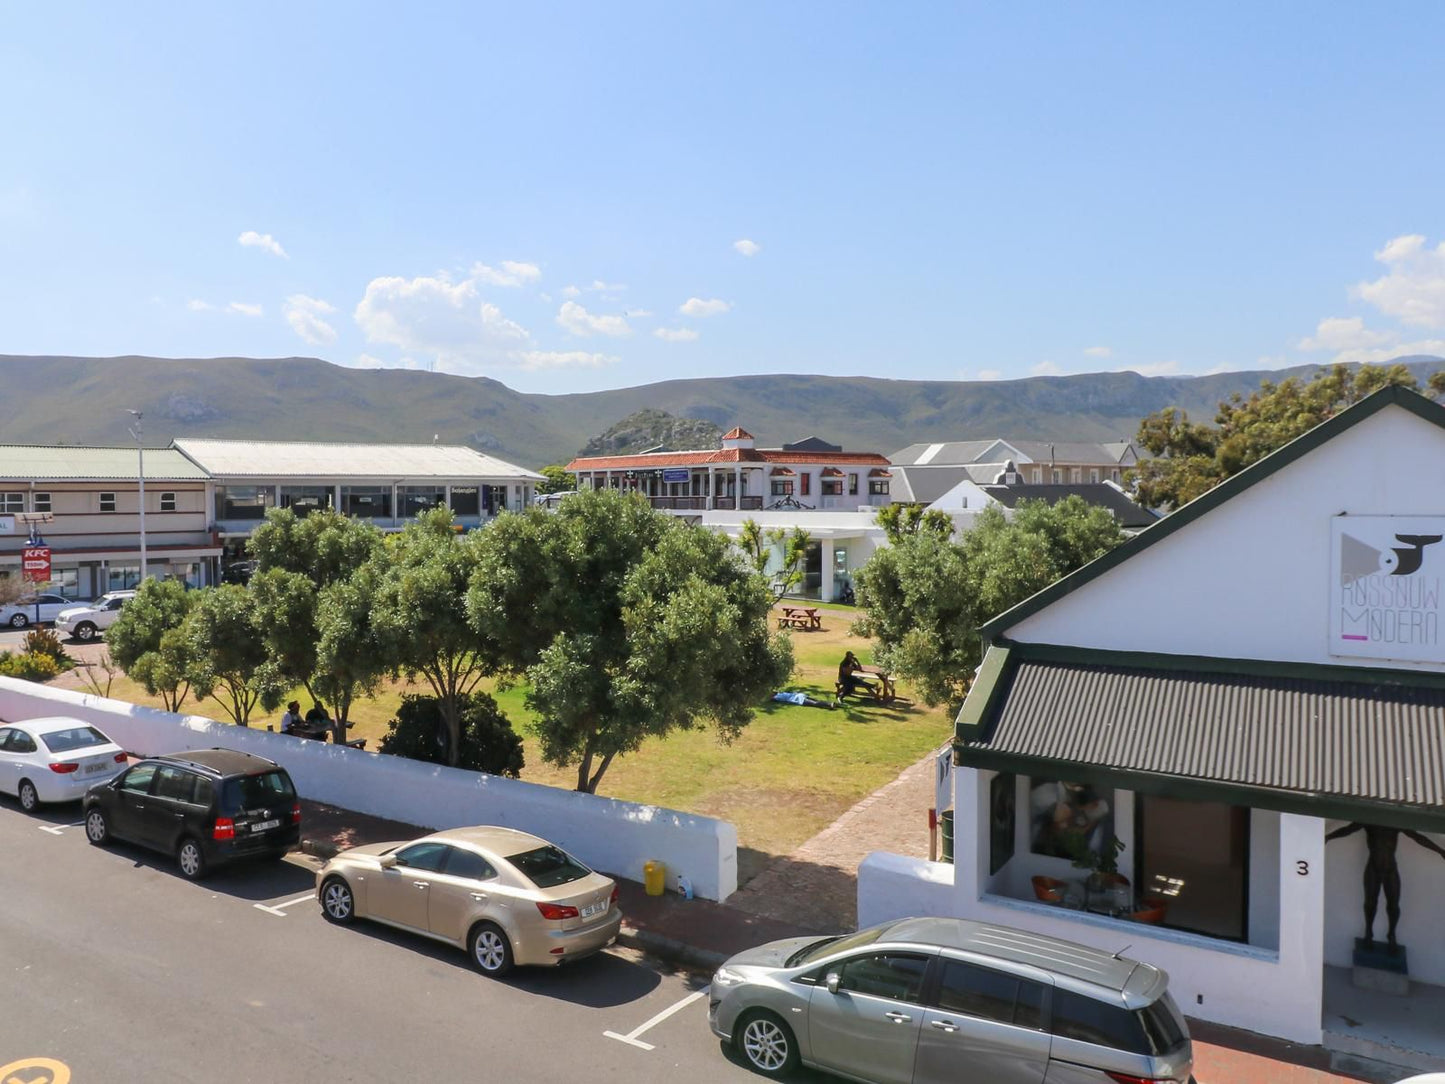 Zzzone Boutique Hostel Hermanus Western Cape South Africa House, Building, Architecture, Car, Vehicle